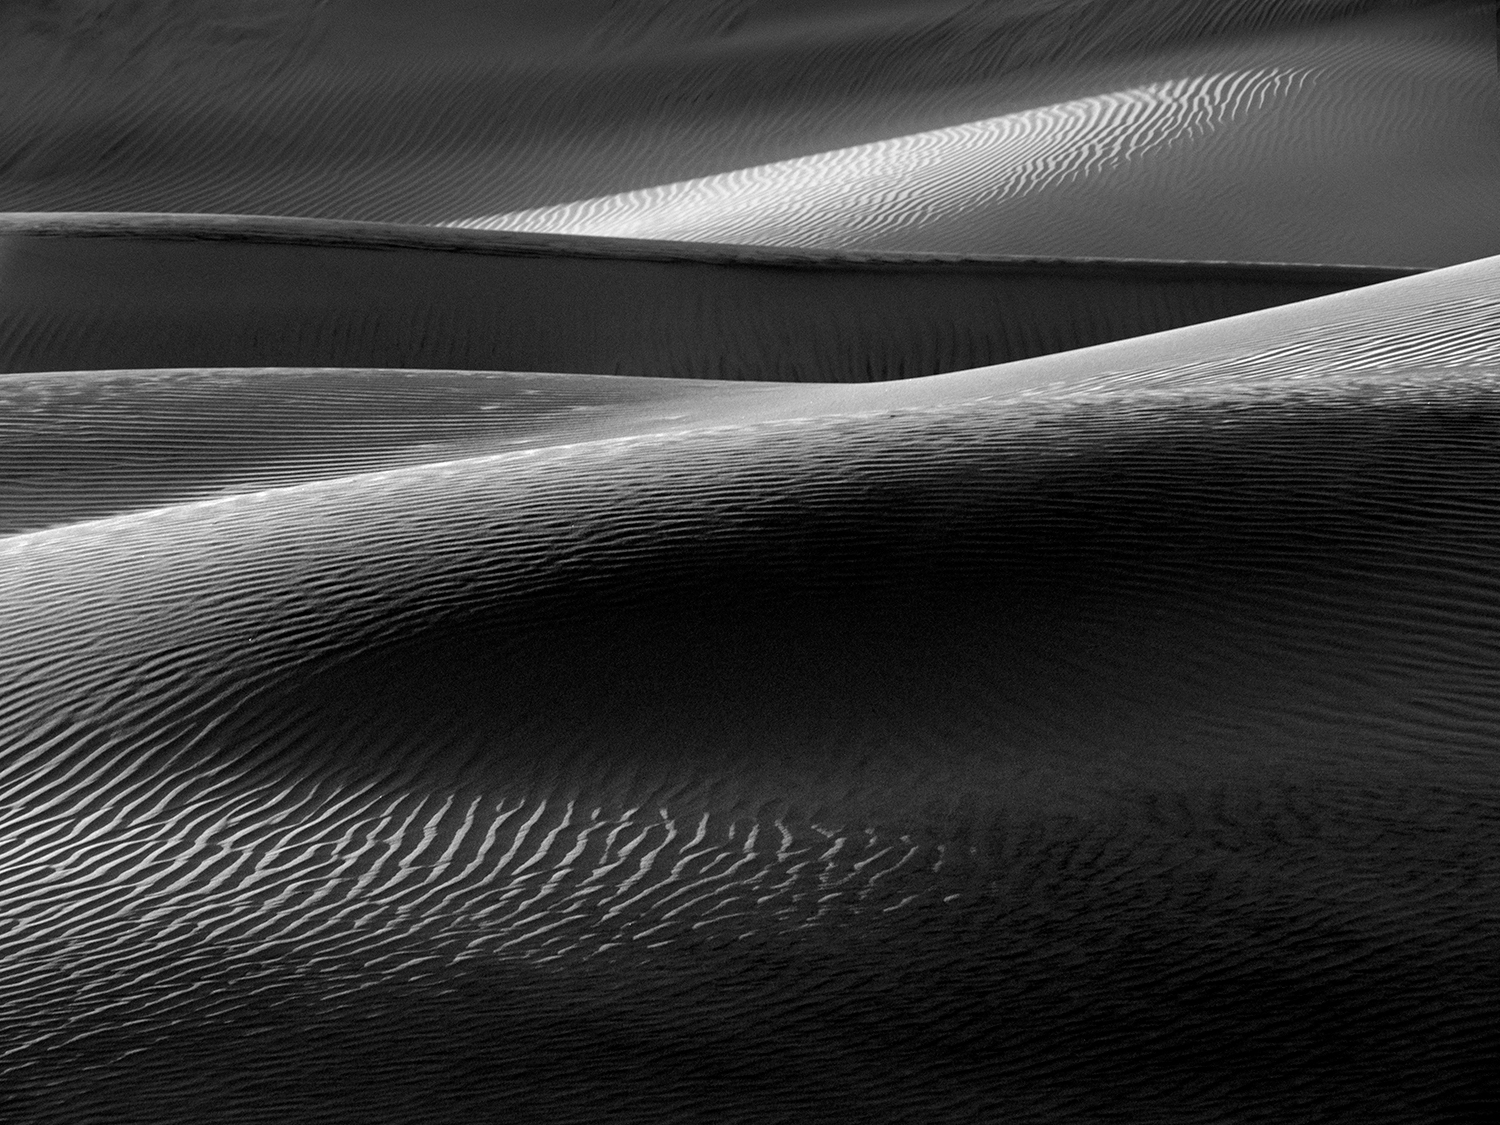 Light, shadow, and sand patterns in the Mesquite Flats Sand Dunes in Death Valley National Park in California